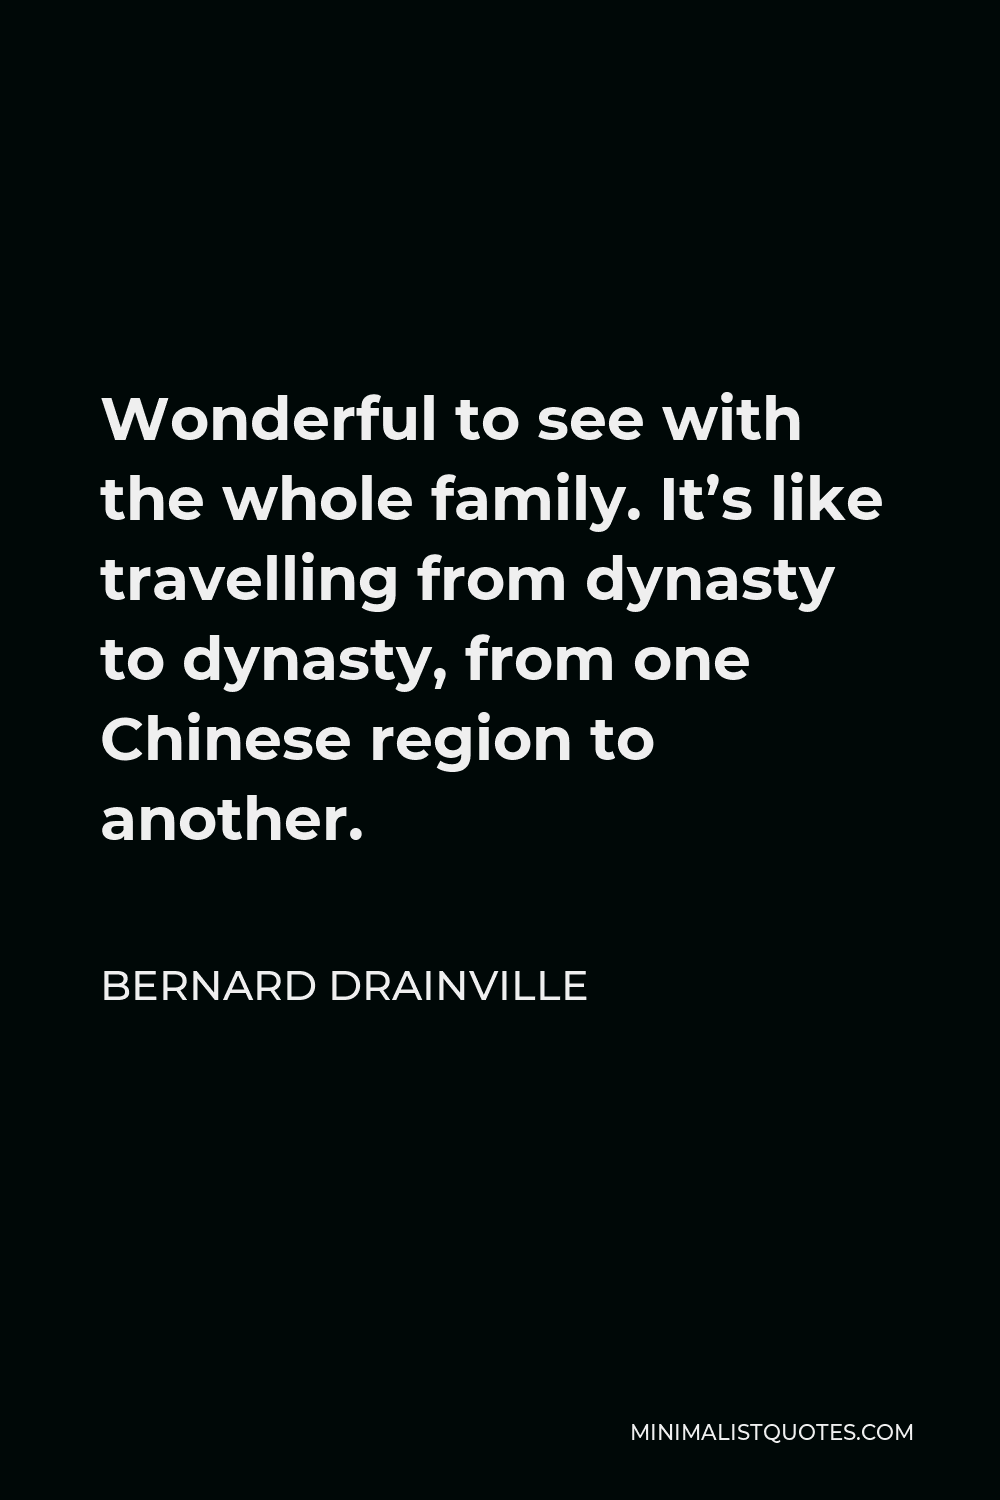 Bernard Drainville Quote - Wonderful to see with the whole family. It’s like travelling from dynasty to dynasty, from one Chinese region to another.